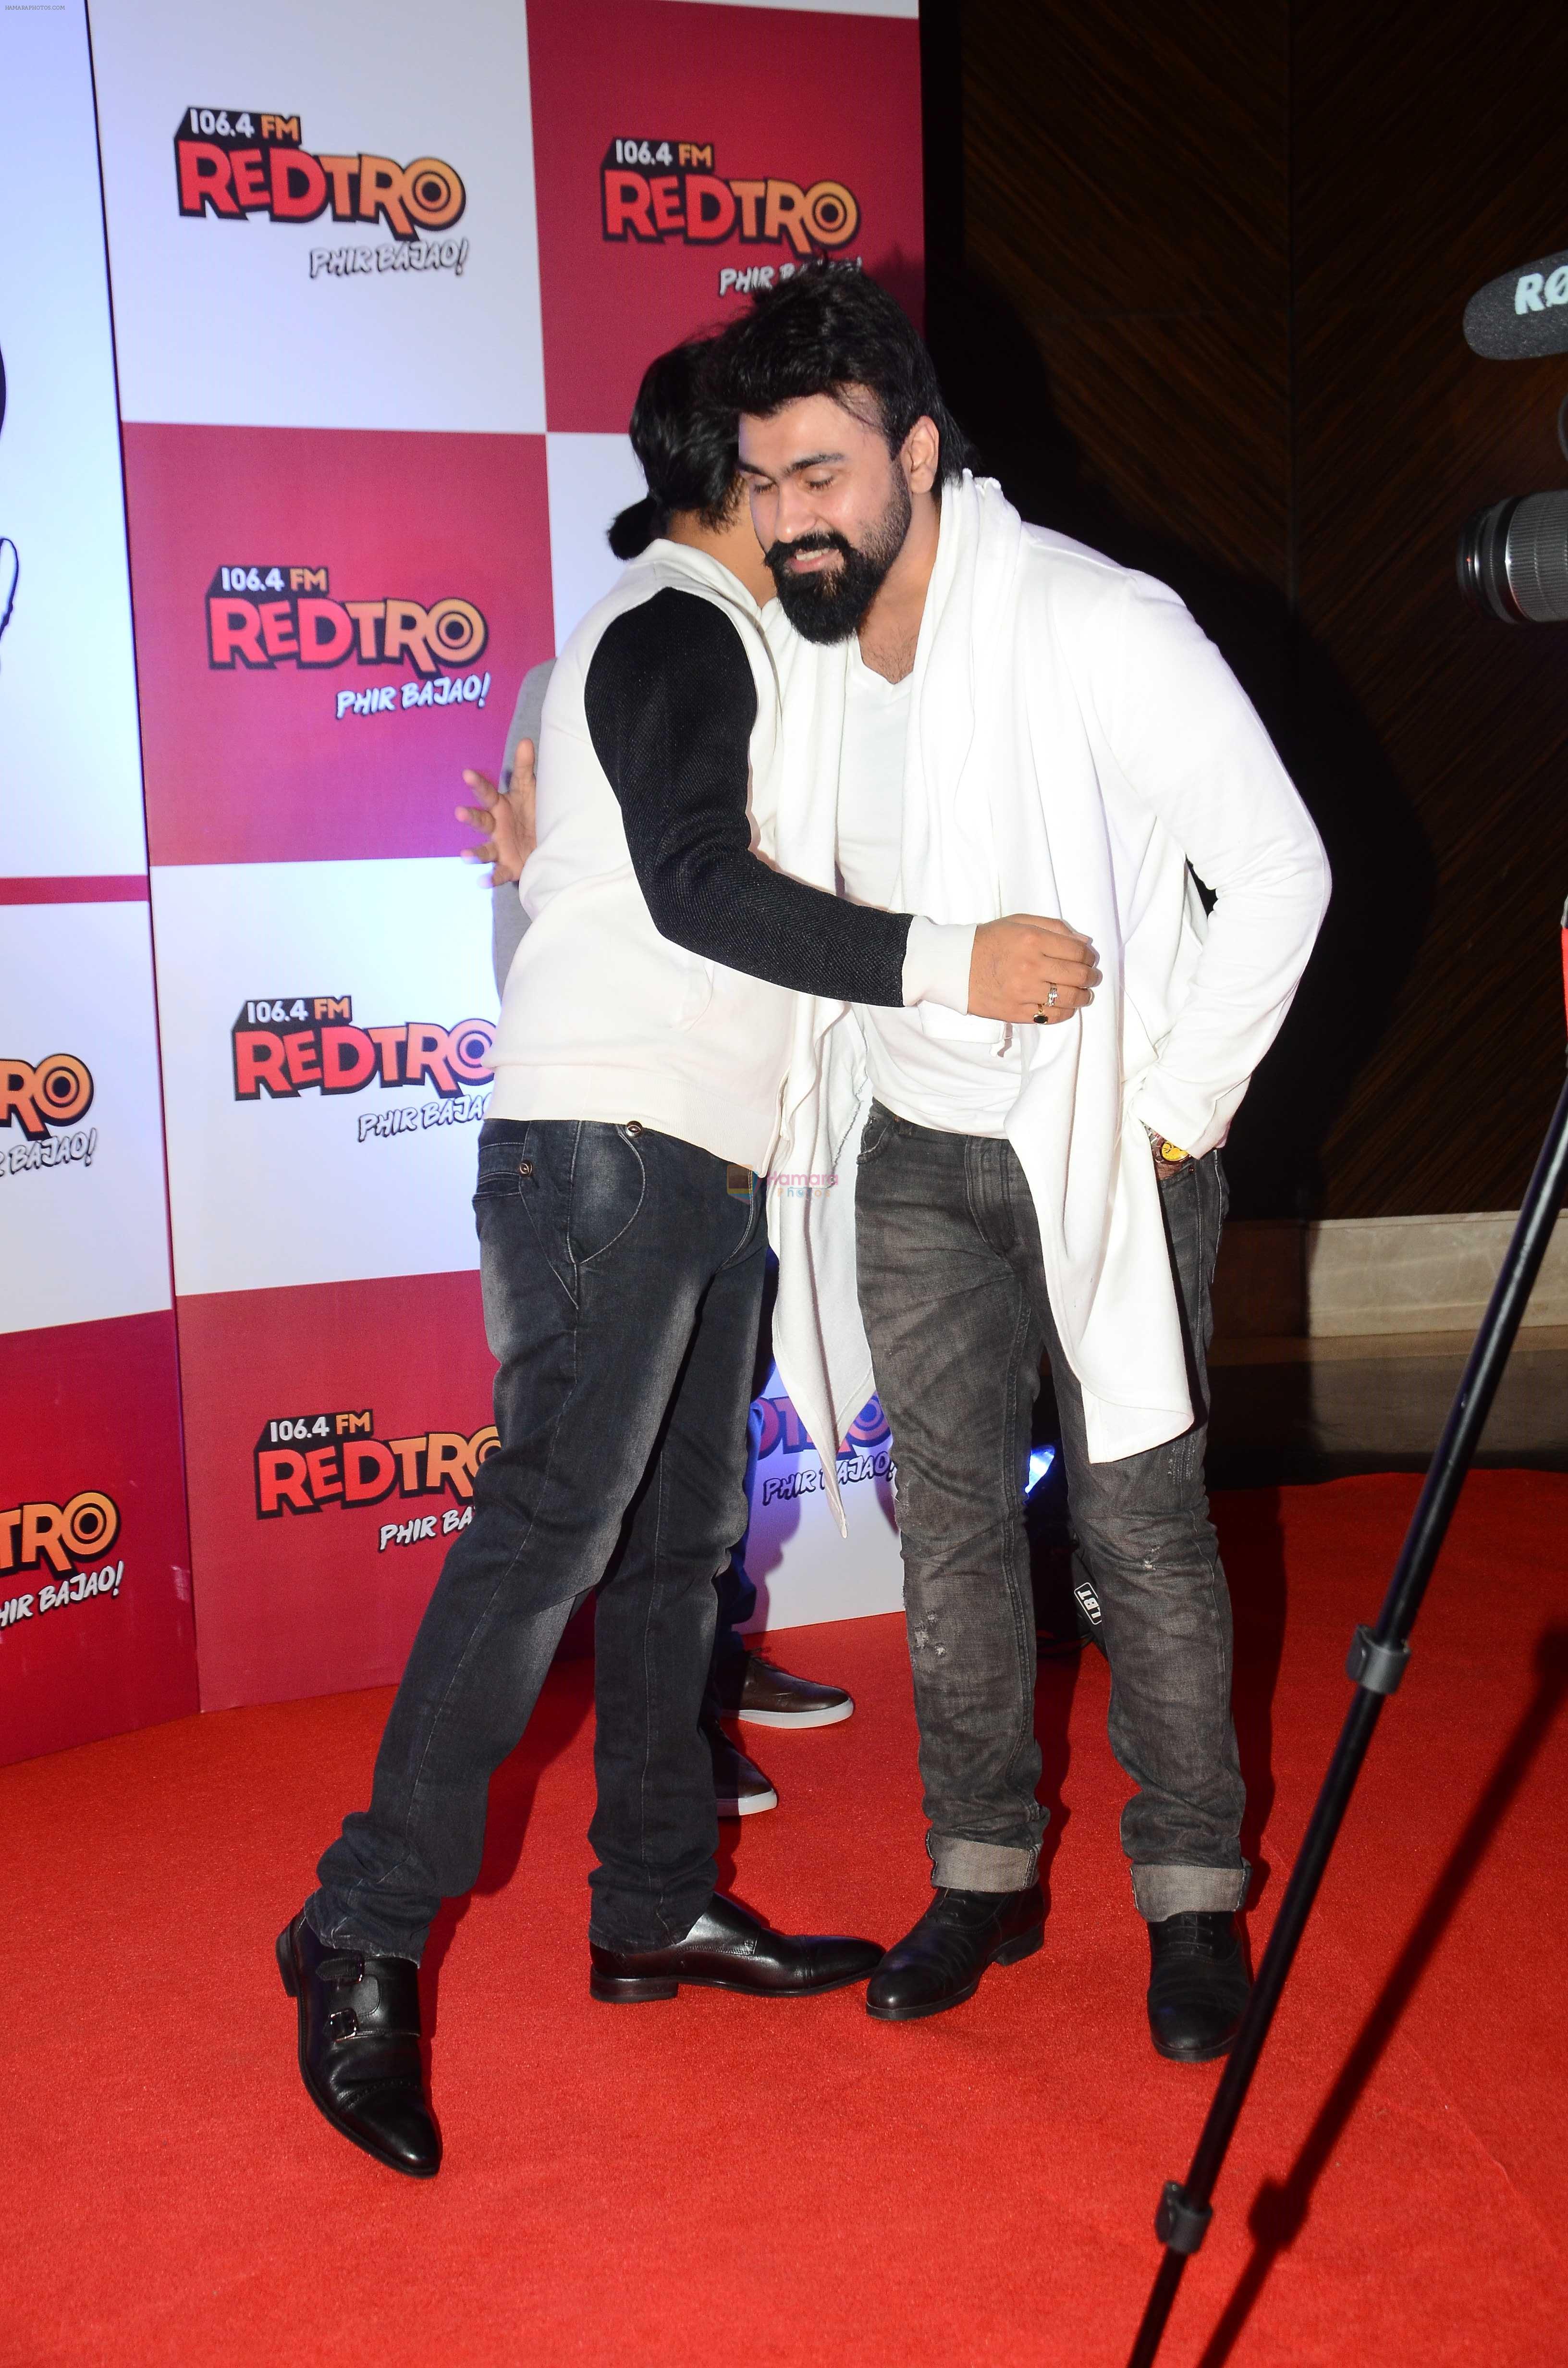 Ankit Tiwari, Aarya Babbar during the party organised by Red FM to celebrate the launch of its new radio station Redtro 106.4 in Mumbai India on 22 July 2016